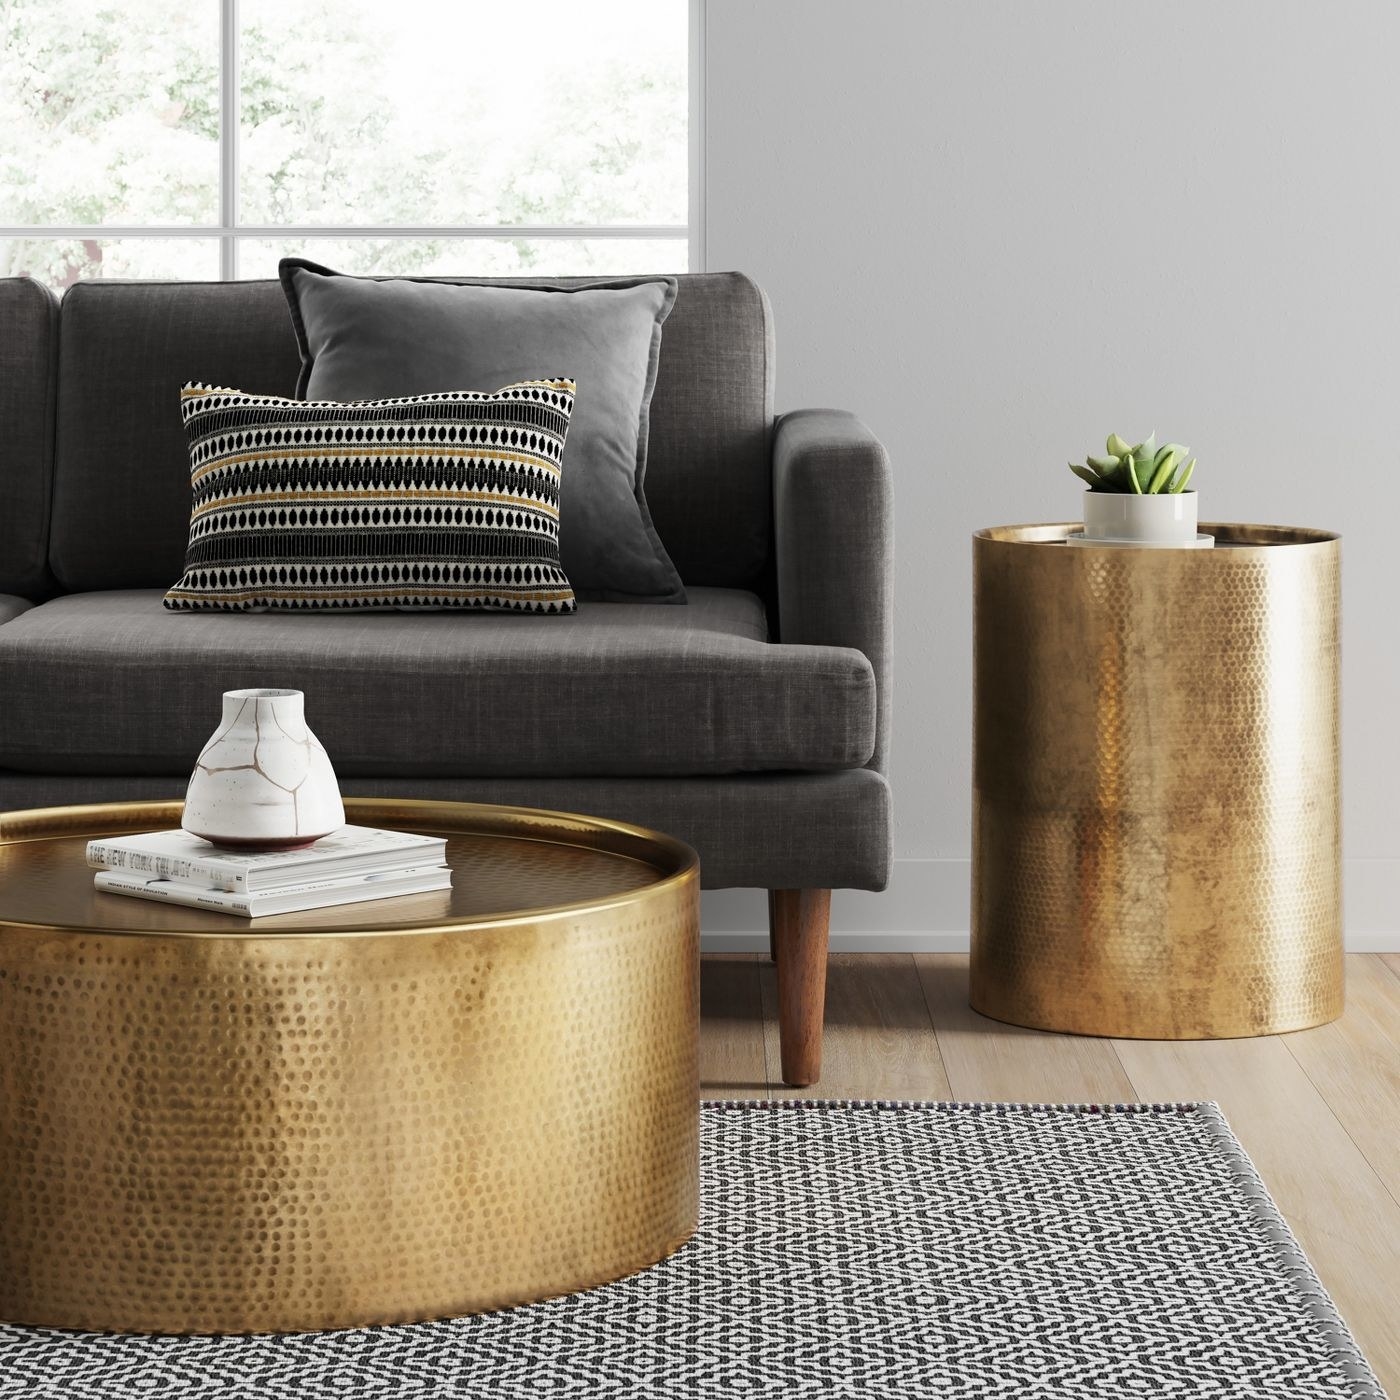 Accent table in a room with a matching coffee table and a couch